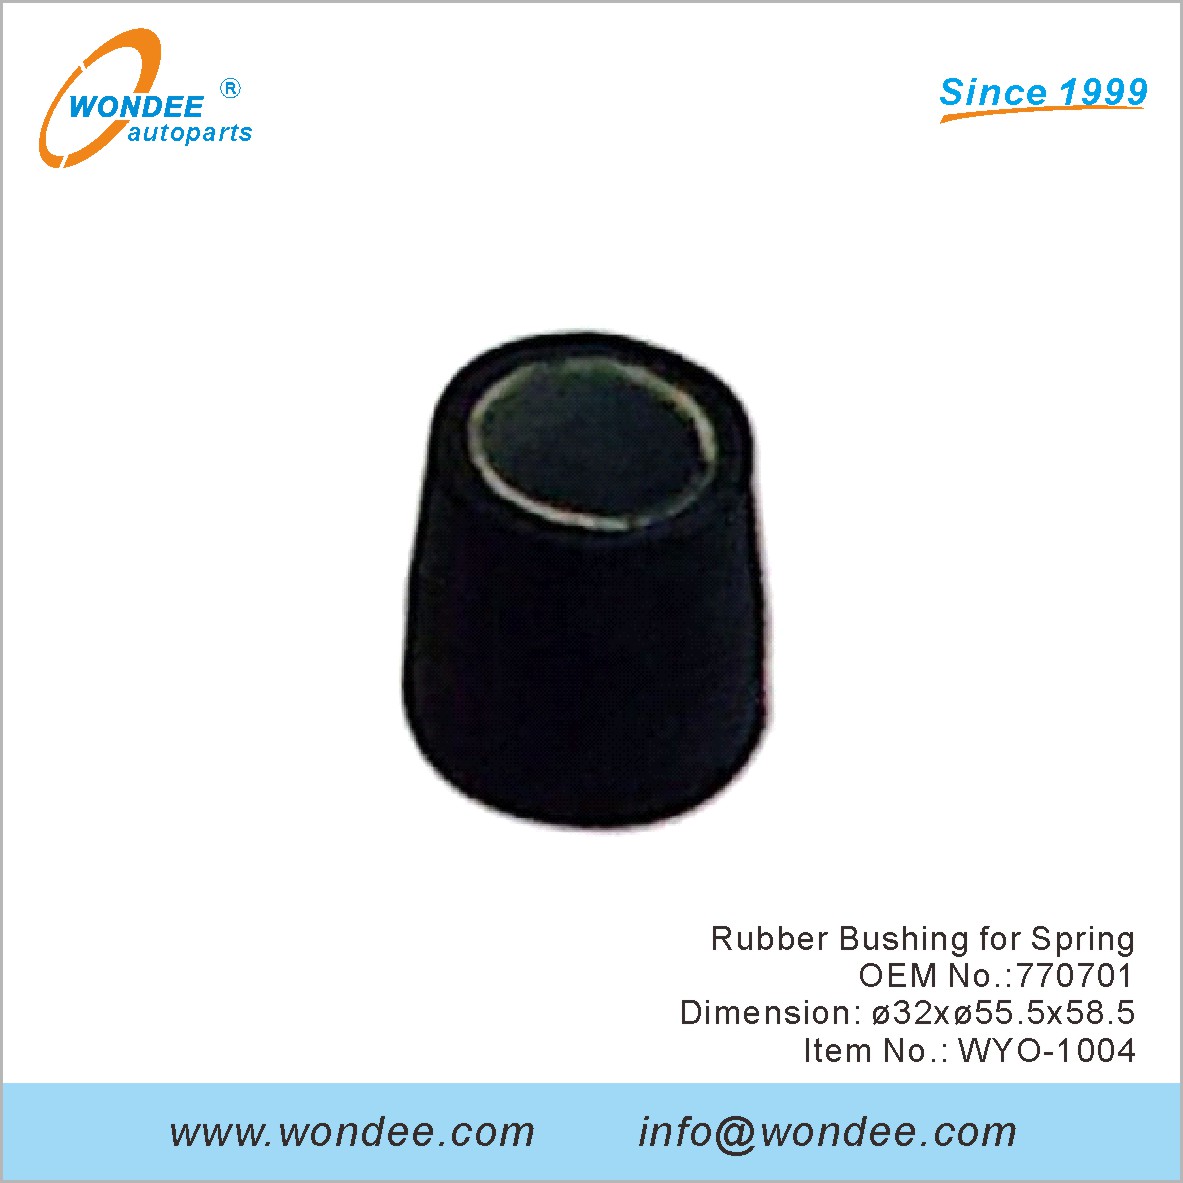 Rubber Bushing for Spring OEM 770701 for Volvo from WONDEE